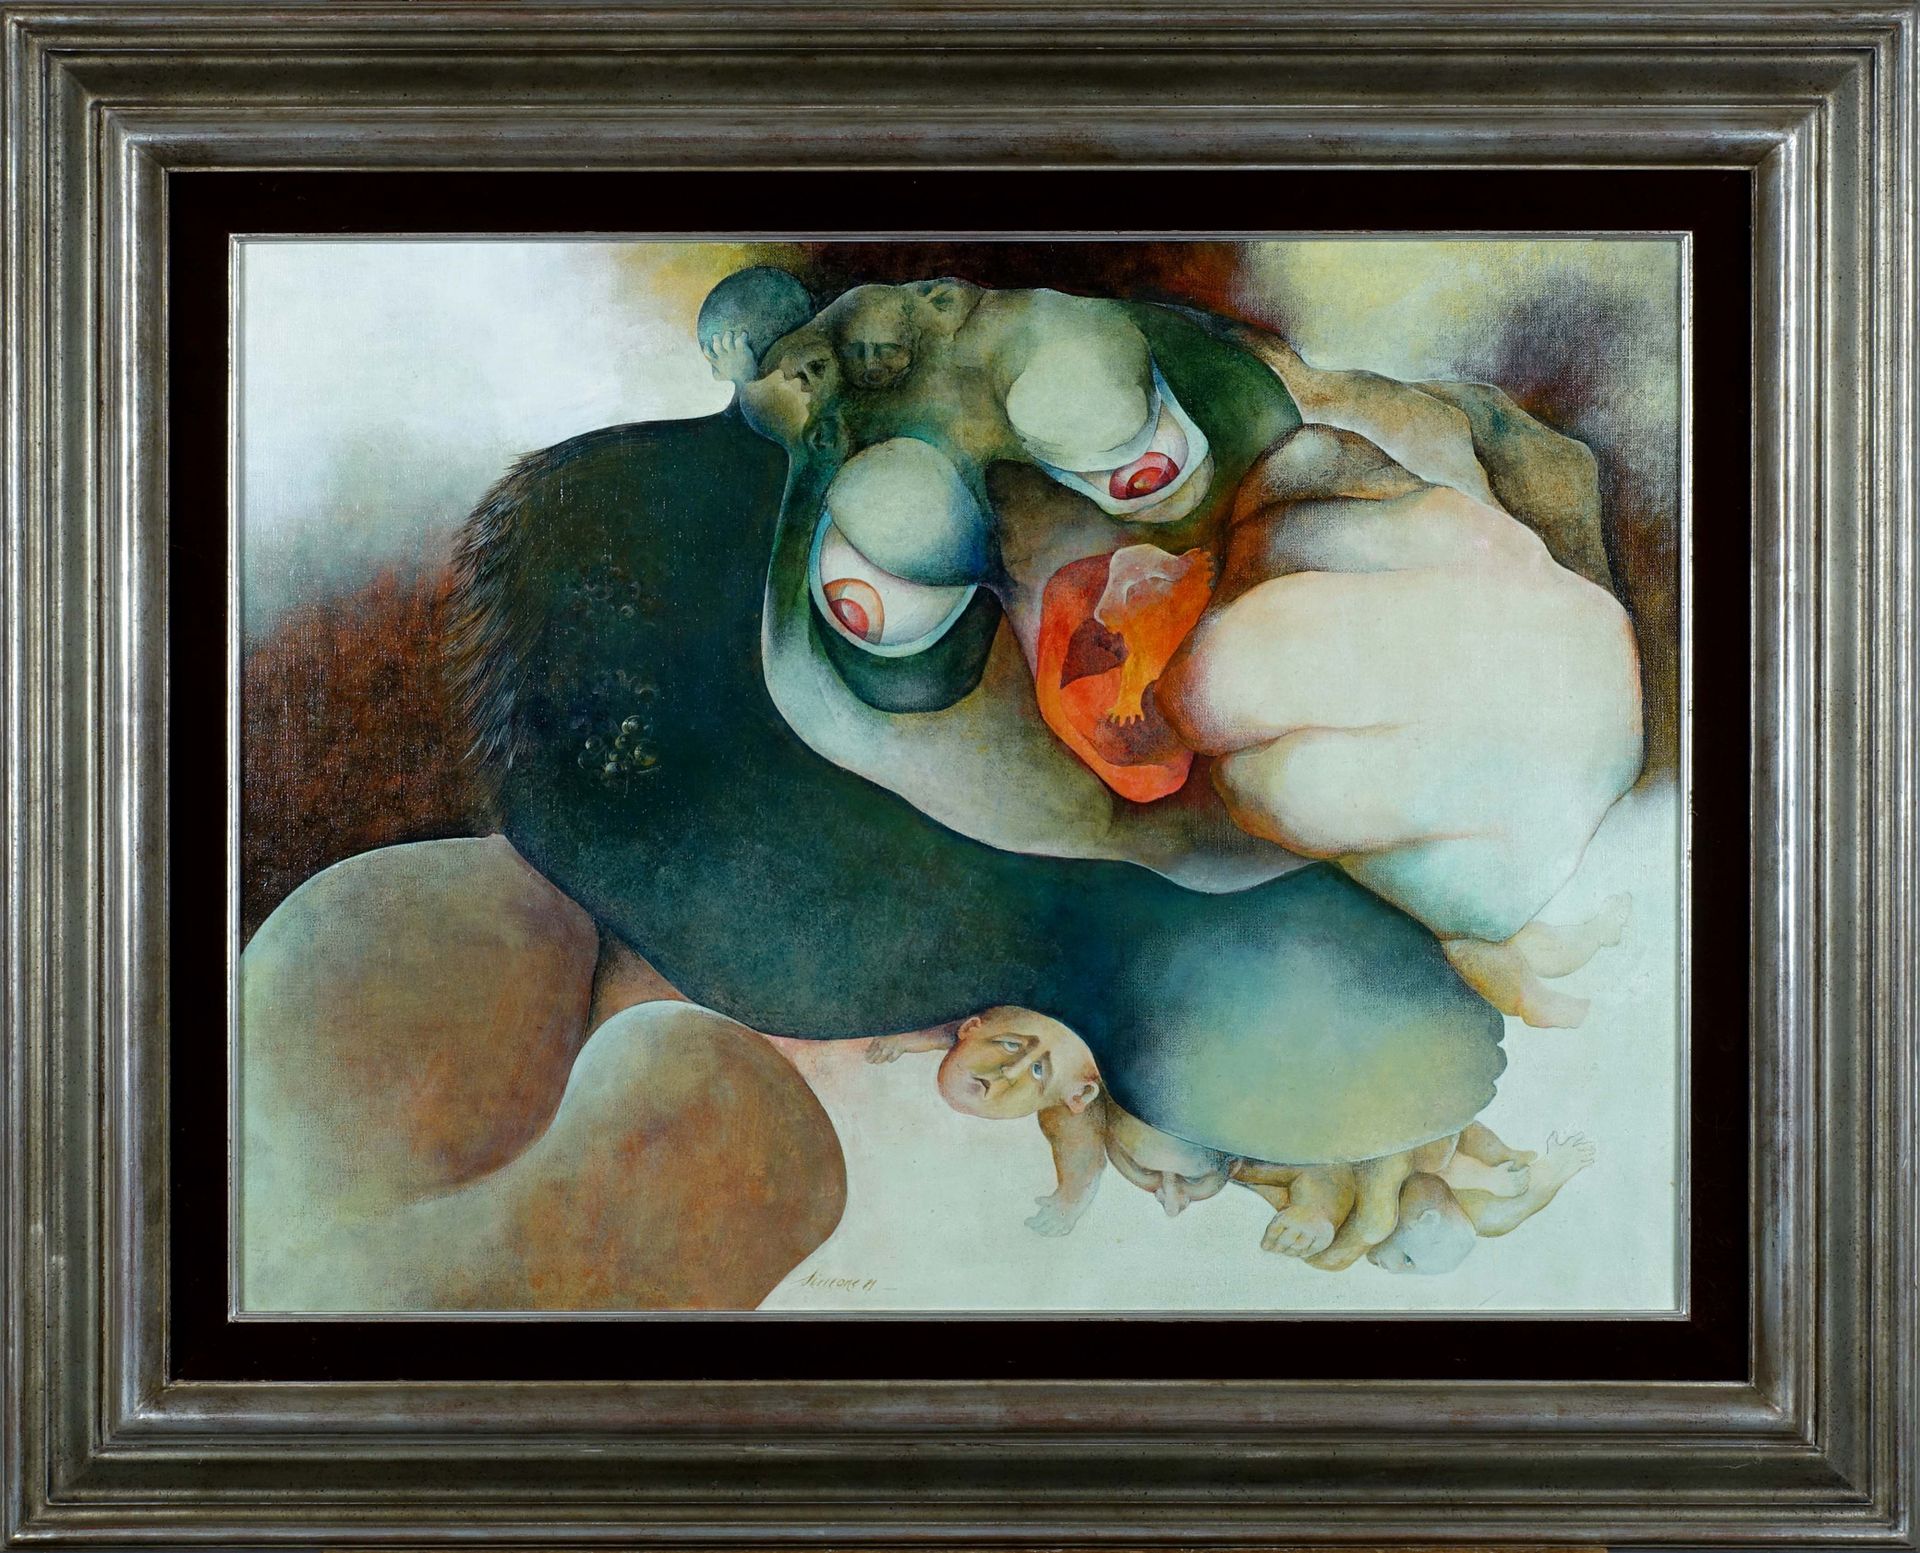 Simone Toussaint (1940). The ogre (dated 81). Oil on canvas, signed in the lower&hellip;